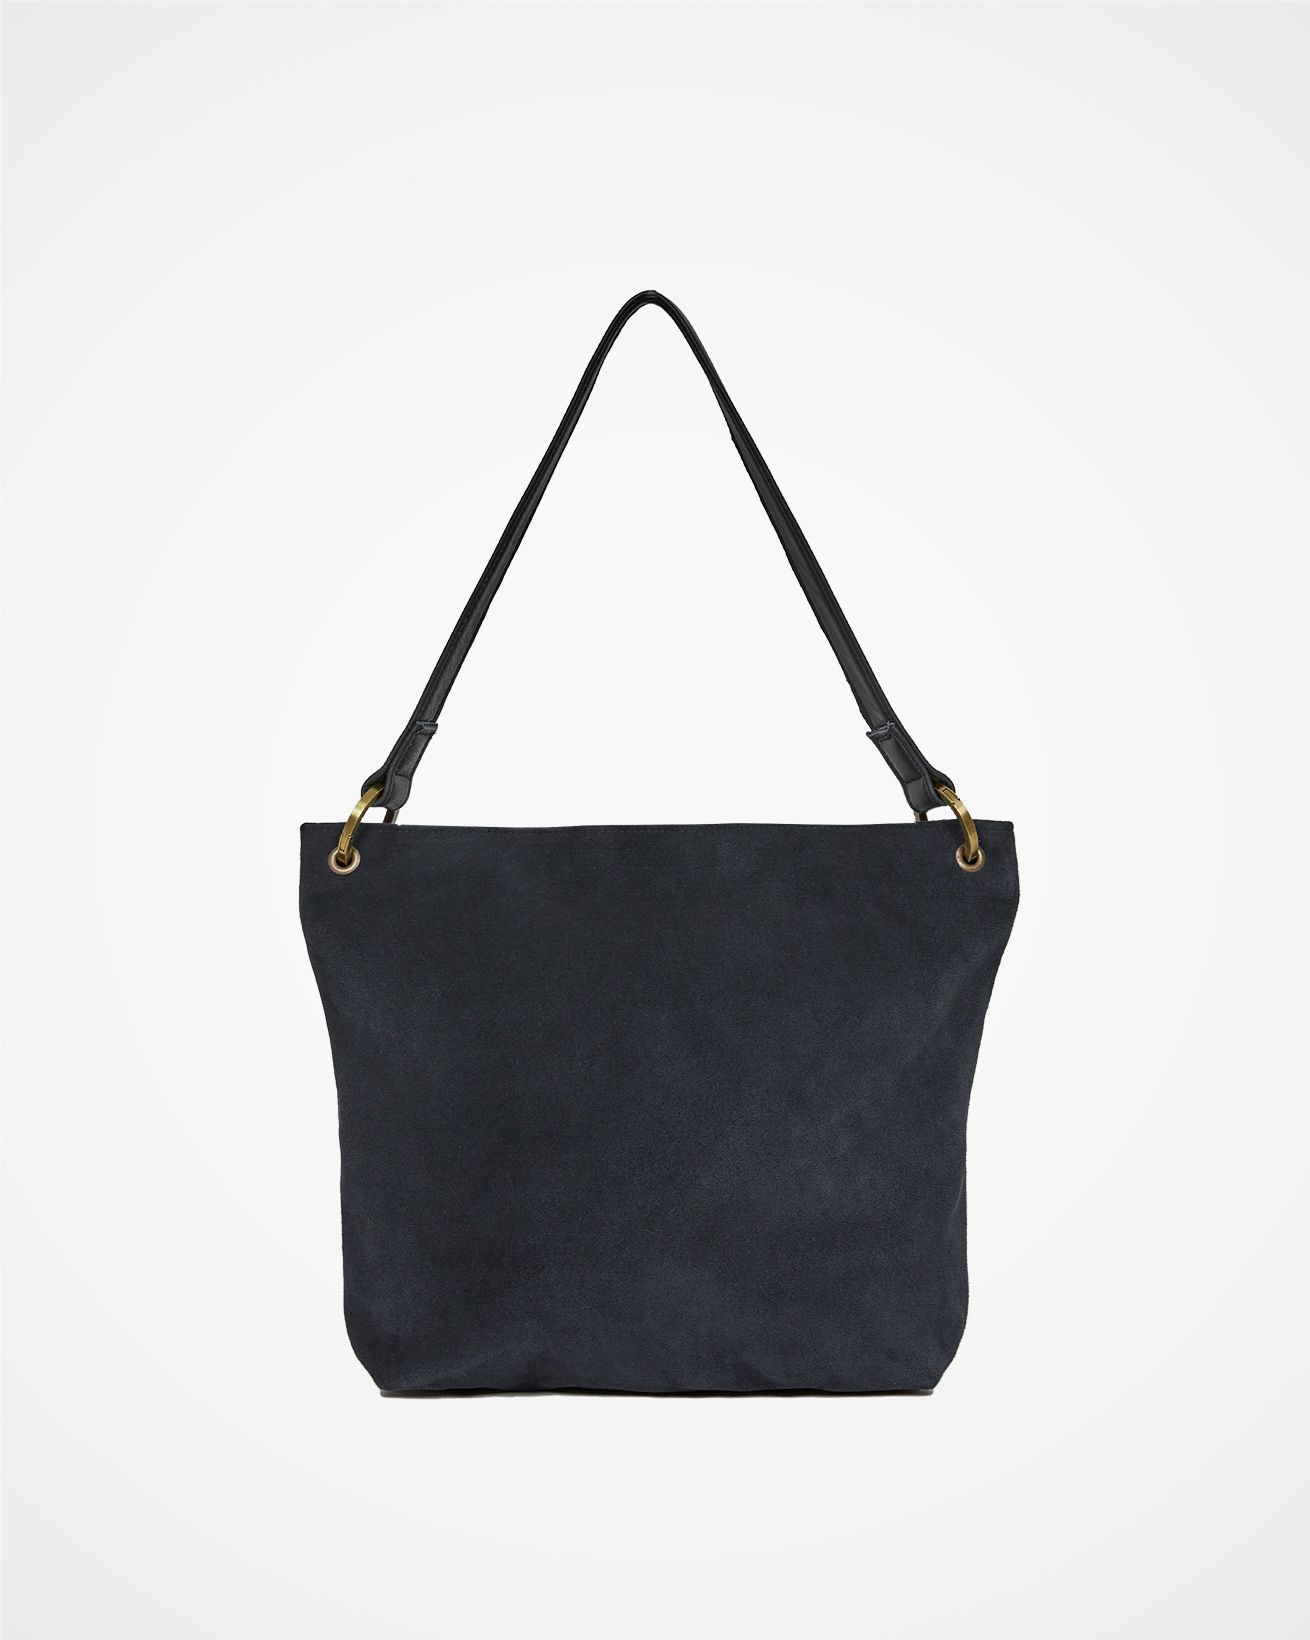 7885_leather-suede-slouch-tote-bag_dark-navy_front_cutout_web.jpg